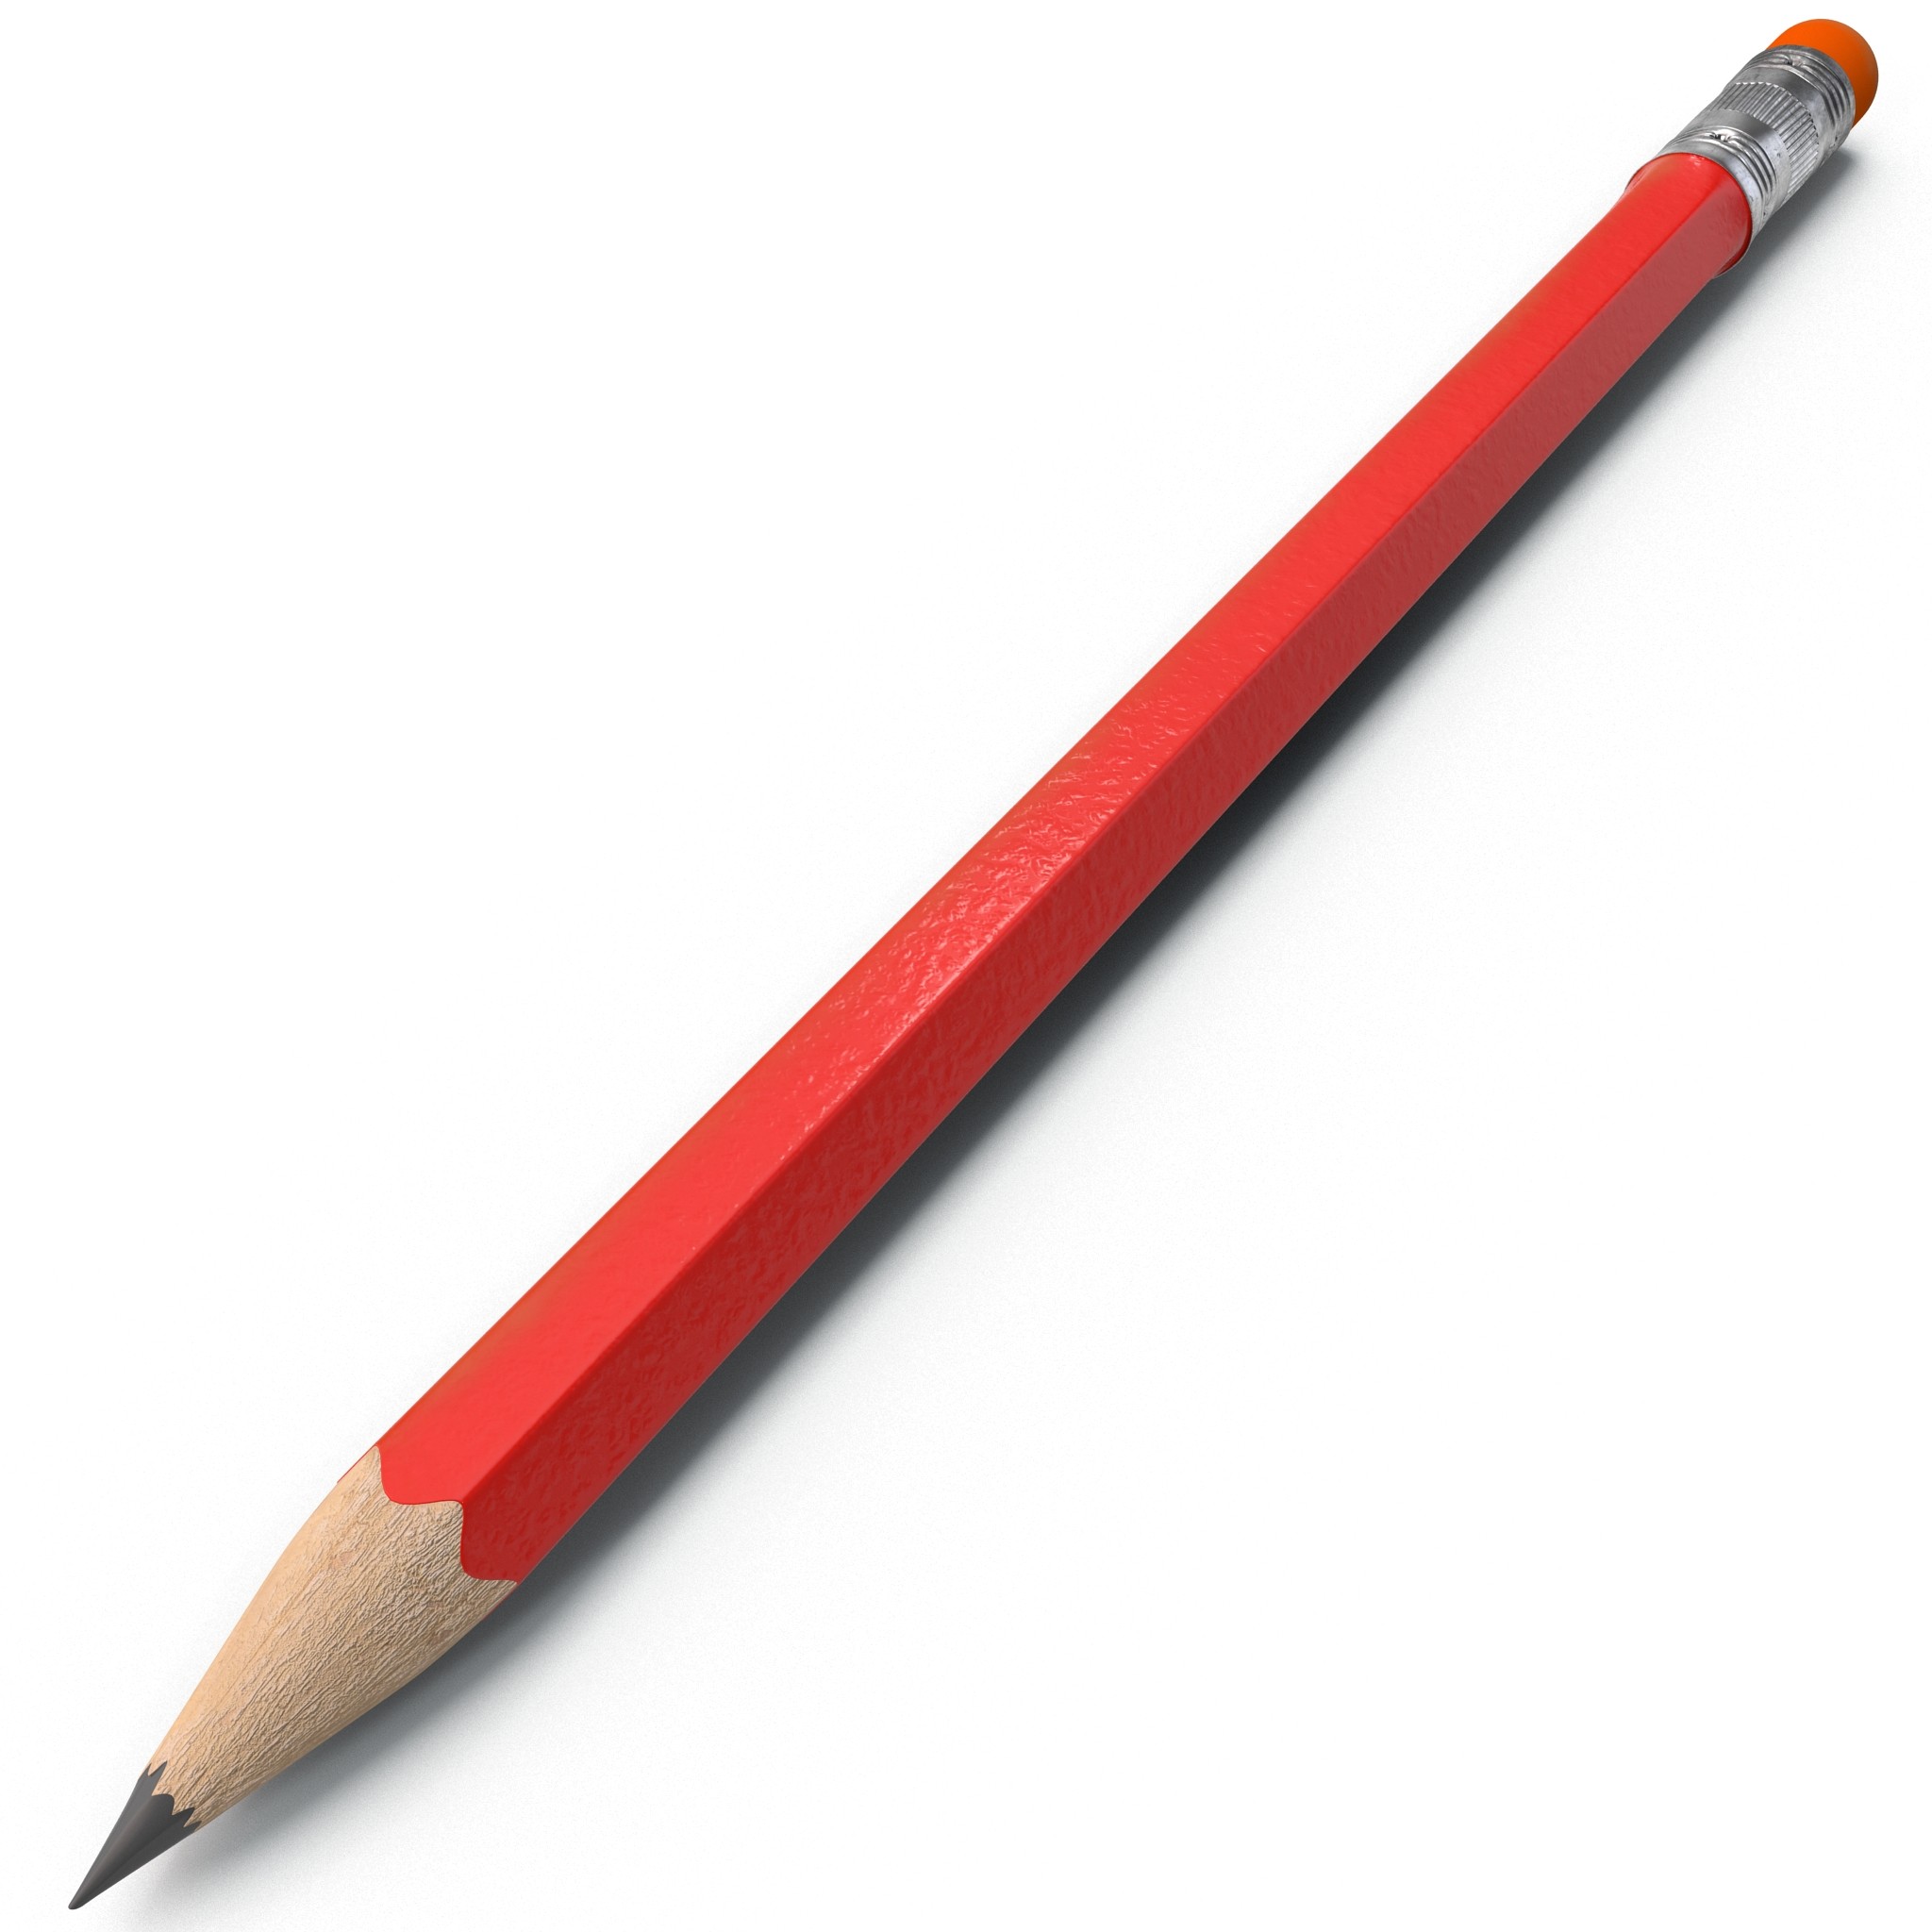 Images of Pencil | 2048x2048